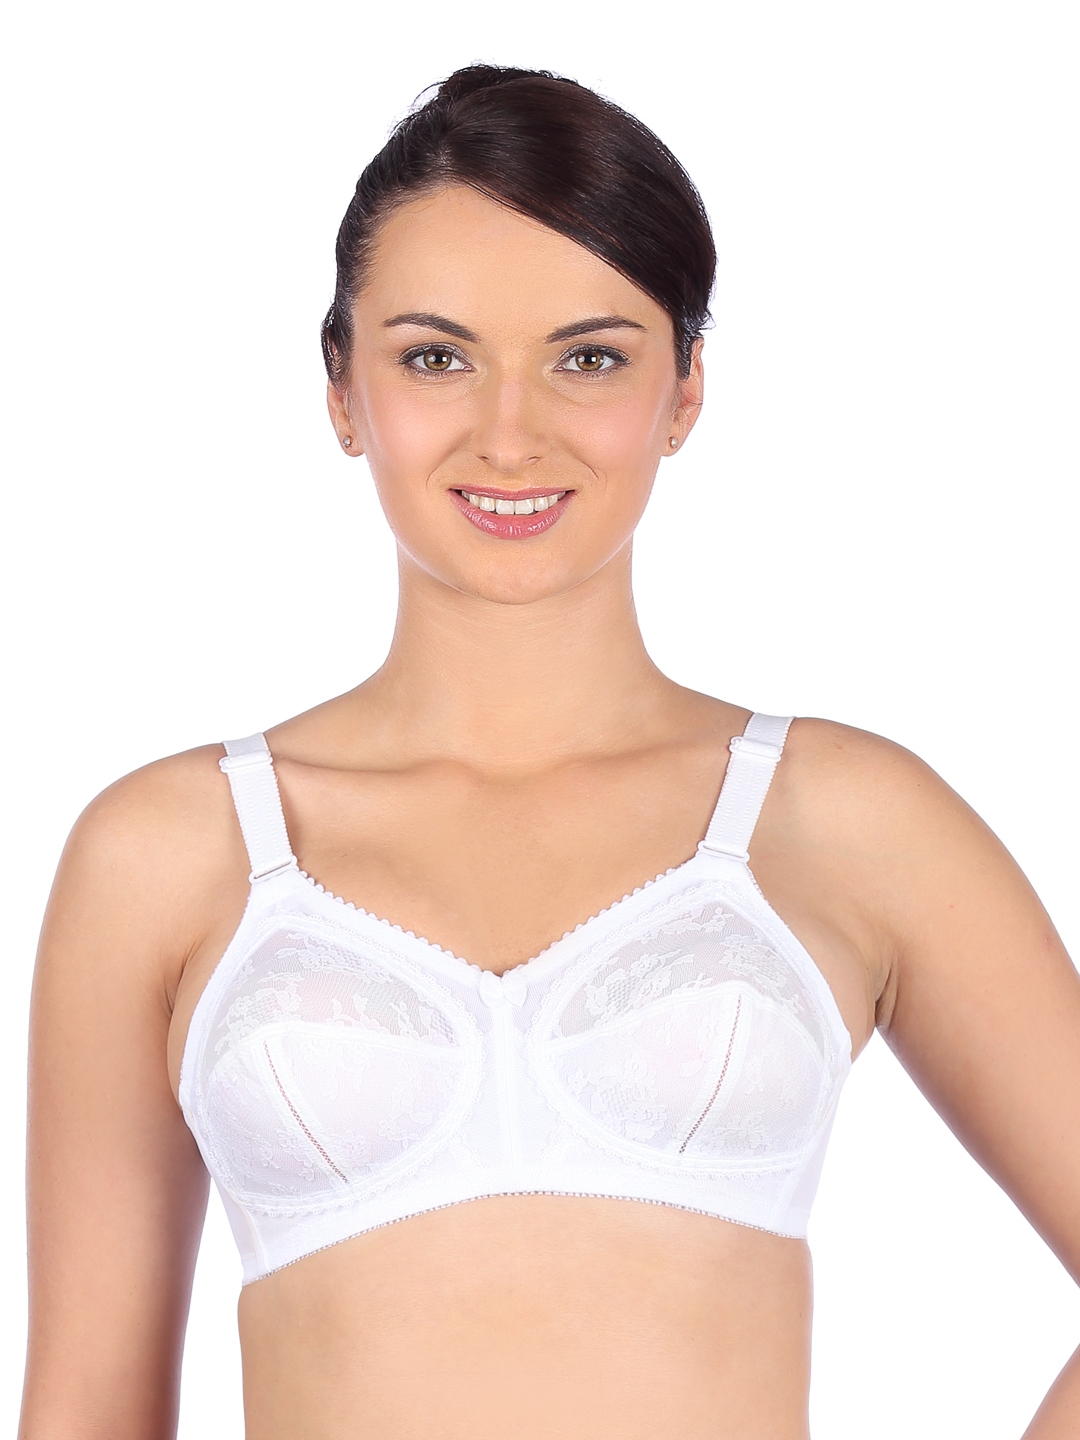 Enamor 40D Size Bras Price Starting From Rs 1,104. Find Verified